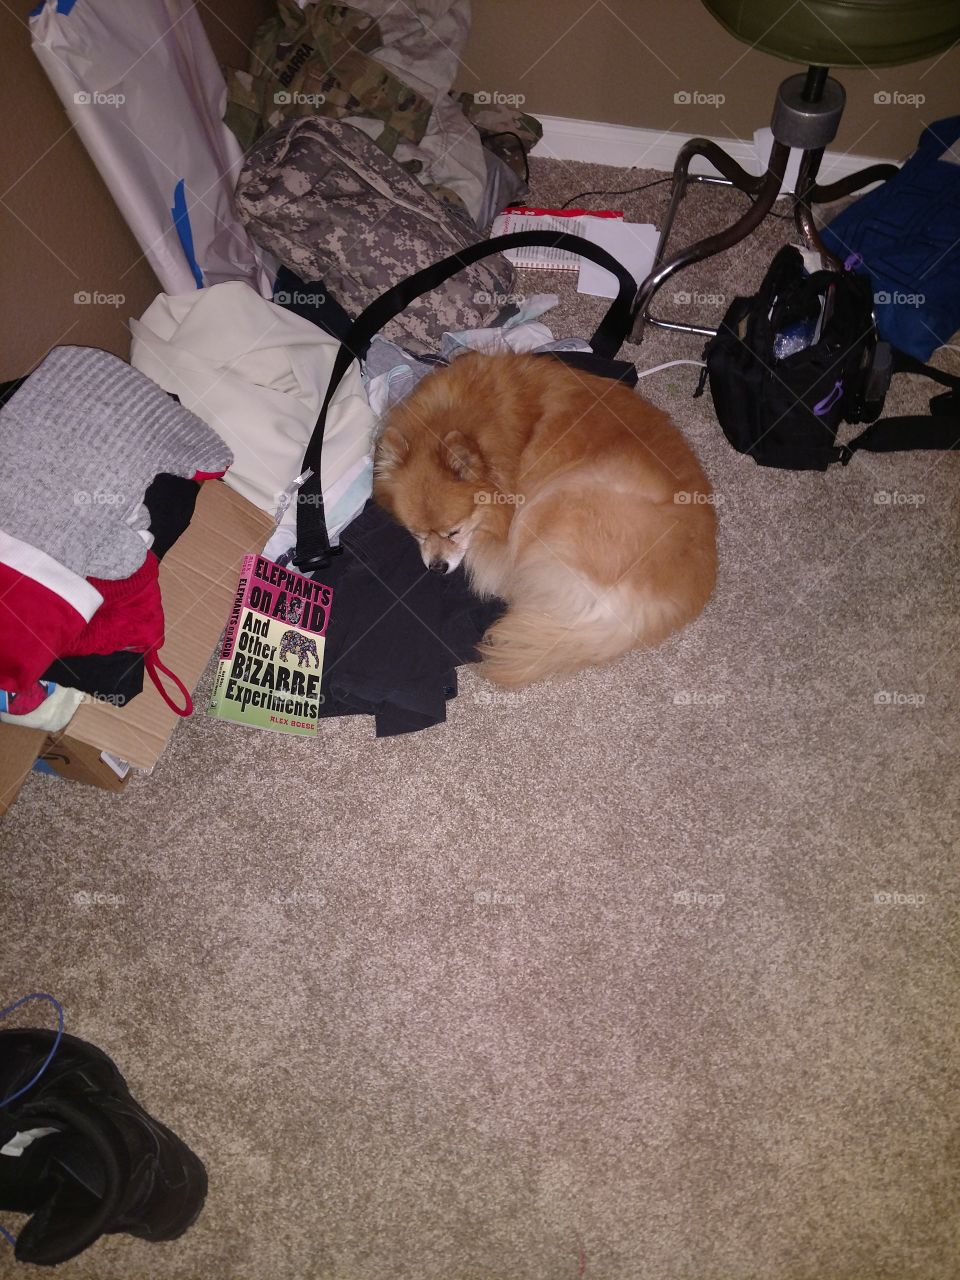 My 15 year old Pomeranian taking one of his billion naps on my stuff I'm trying to put away.